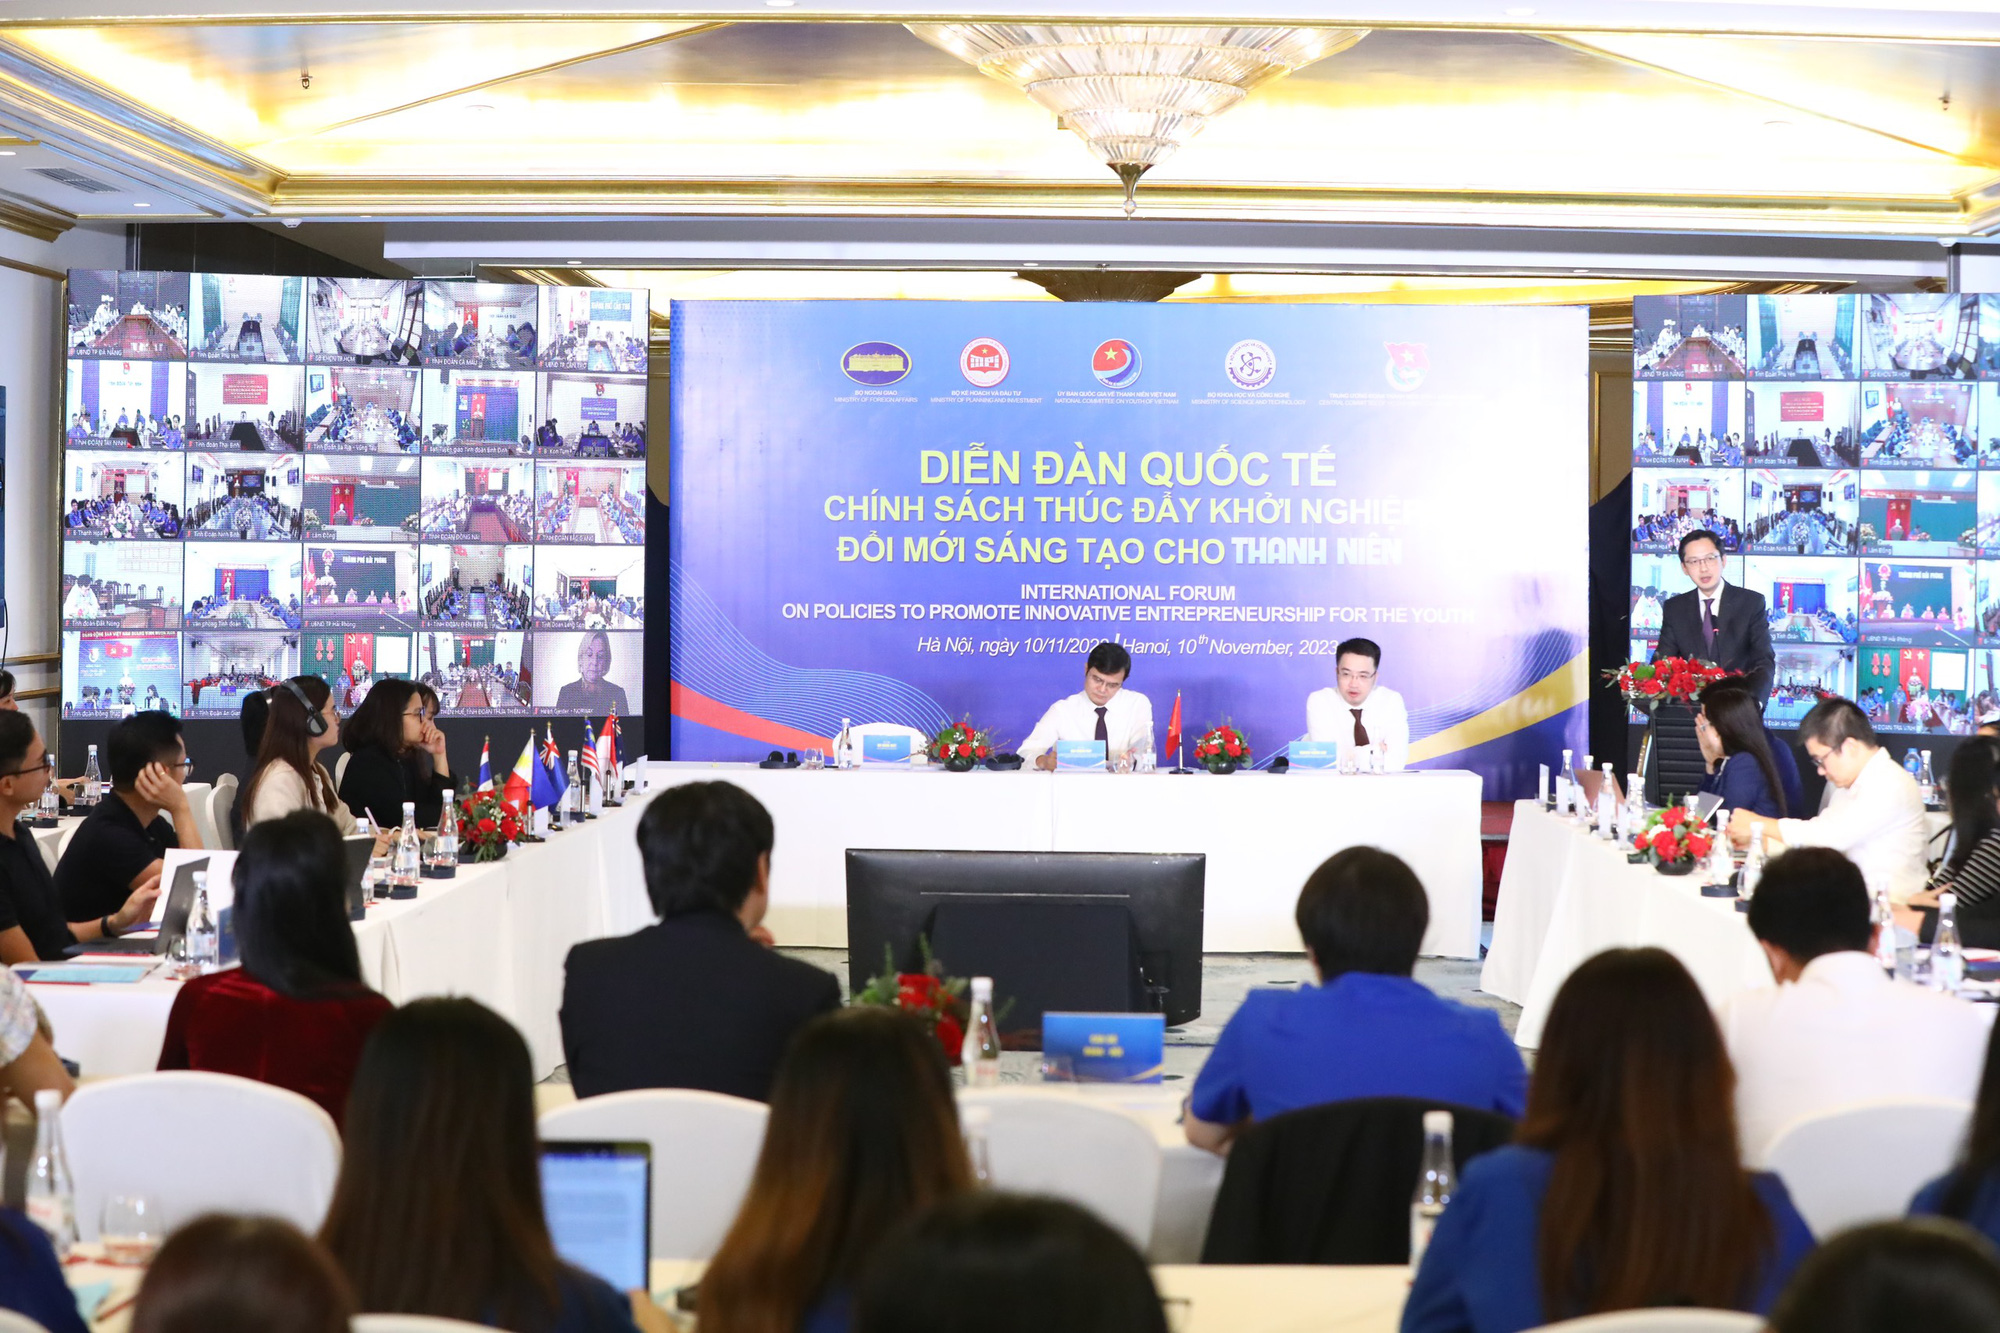 International Forum on 'Policies to Promote Innovative Startups for Young People' on Hanoi's Direct Bridge - Photo: DUC VU